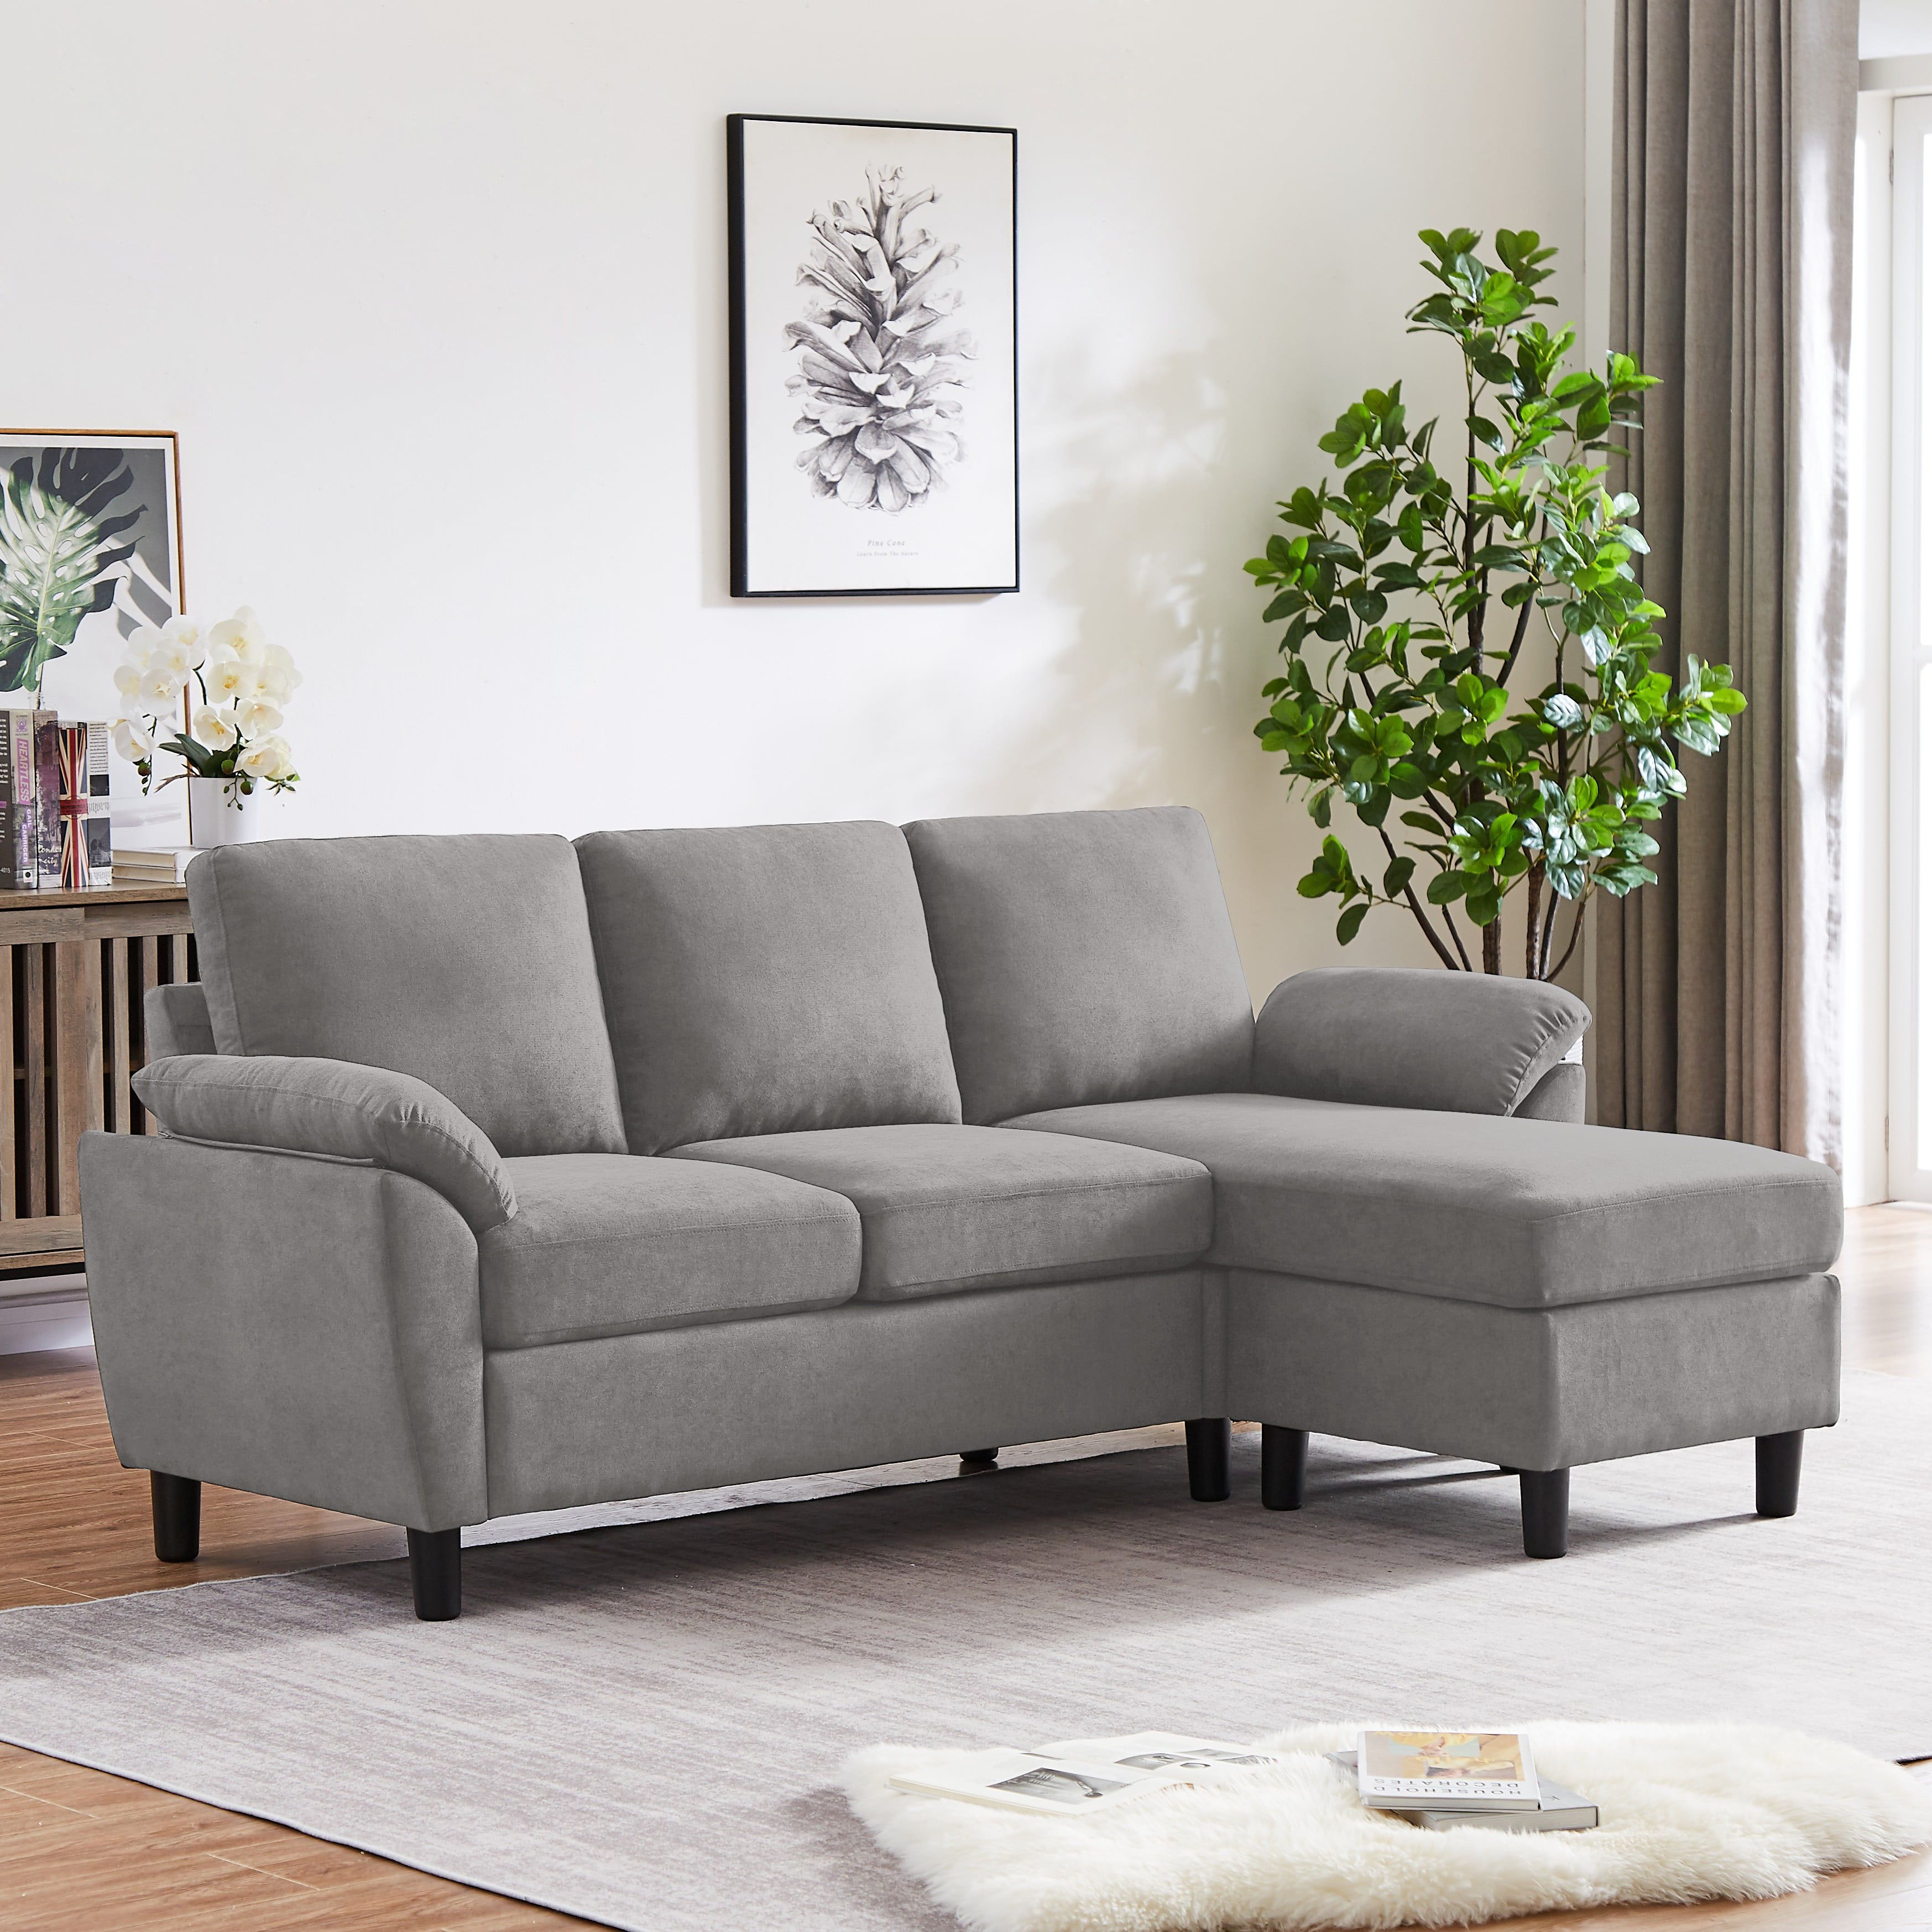 Jarenie Modern Fabric L Shapped Sofa Sectional Couches For Living Room  Convertible Sofa With Matching Chaise For Office, Apartment, Studio –  Walmart Regarding Studio Sectional Couches (Photo 9 of 15)